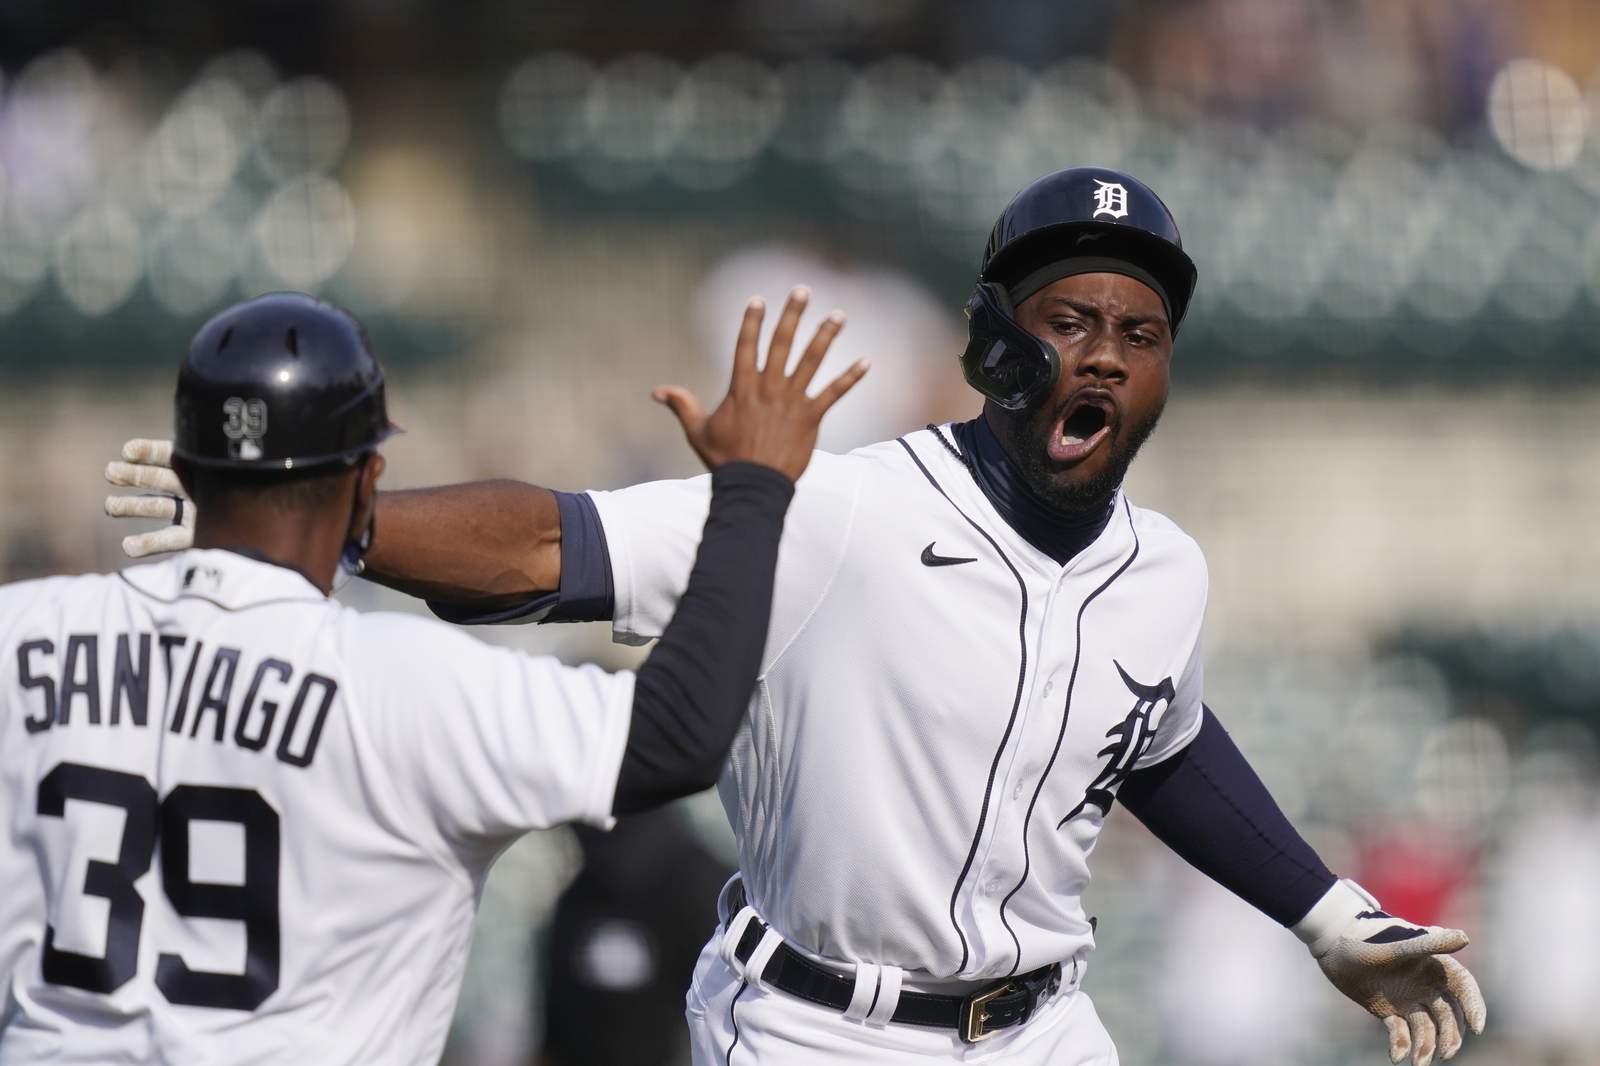 Detroit Tigers about to start 10-game road trip -- this could get a bit rough